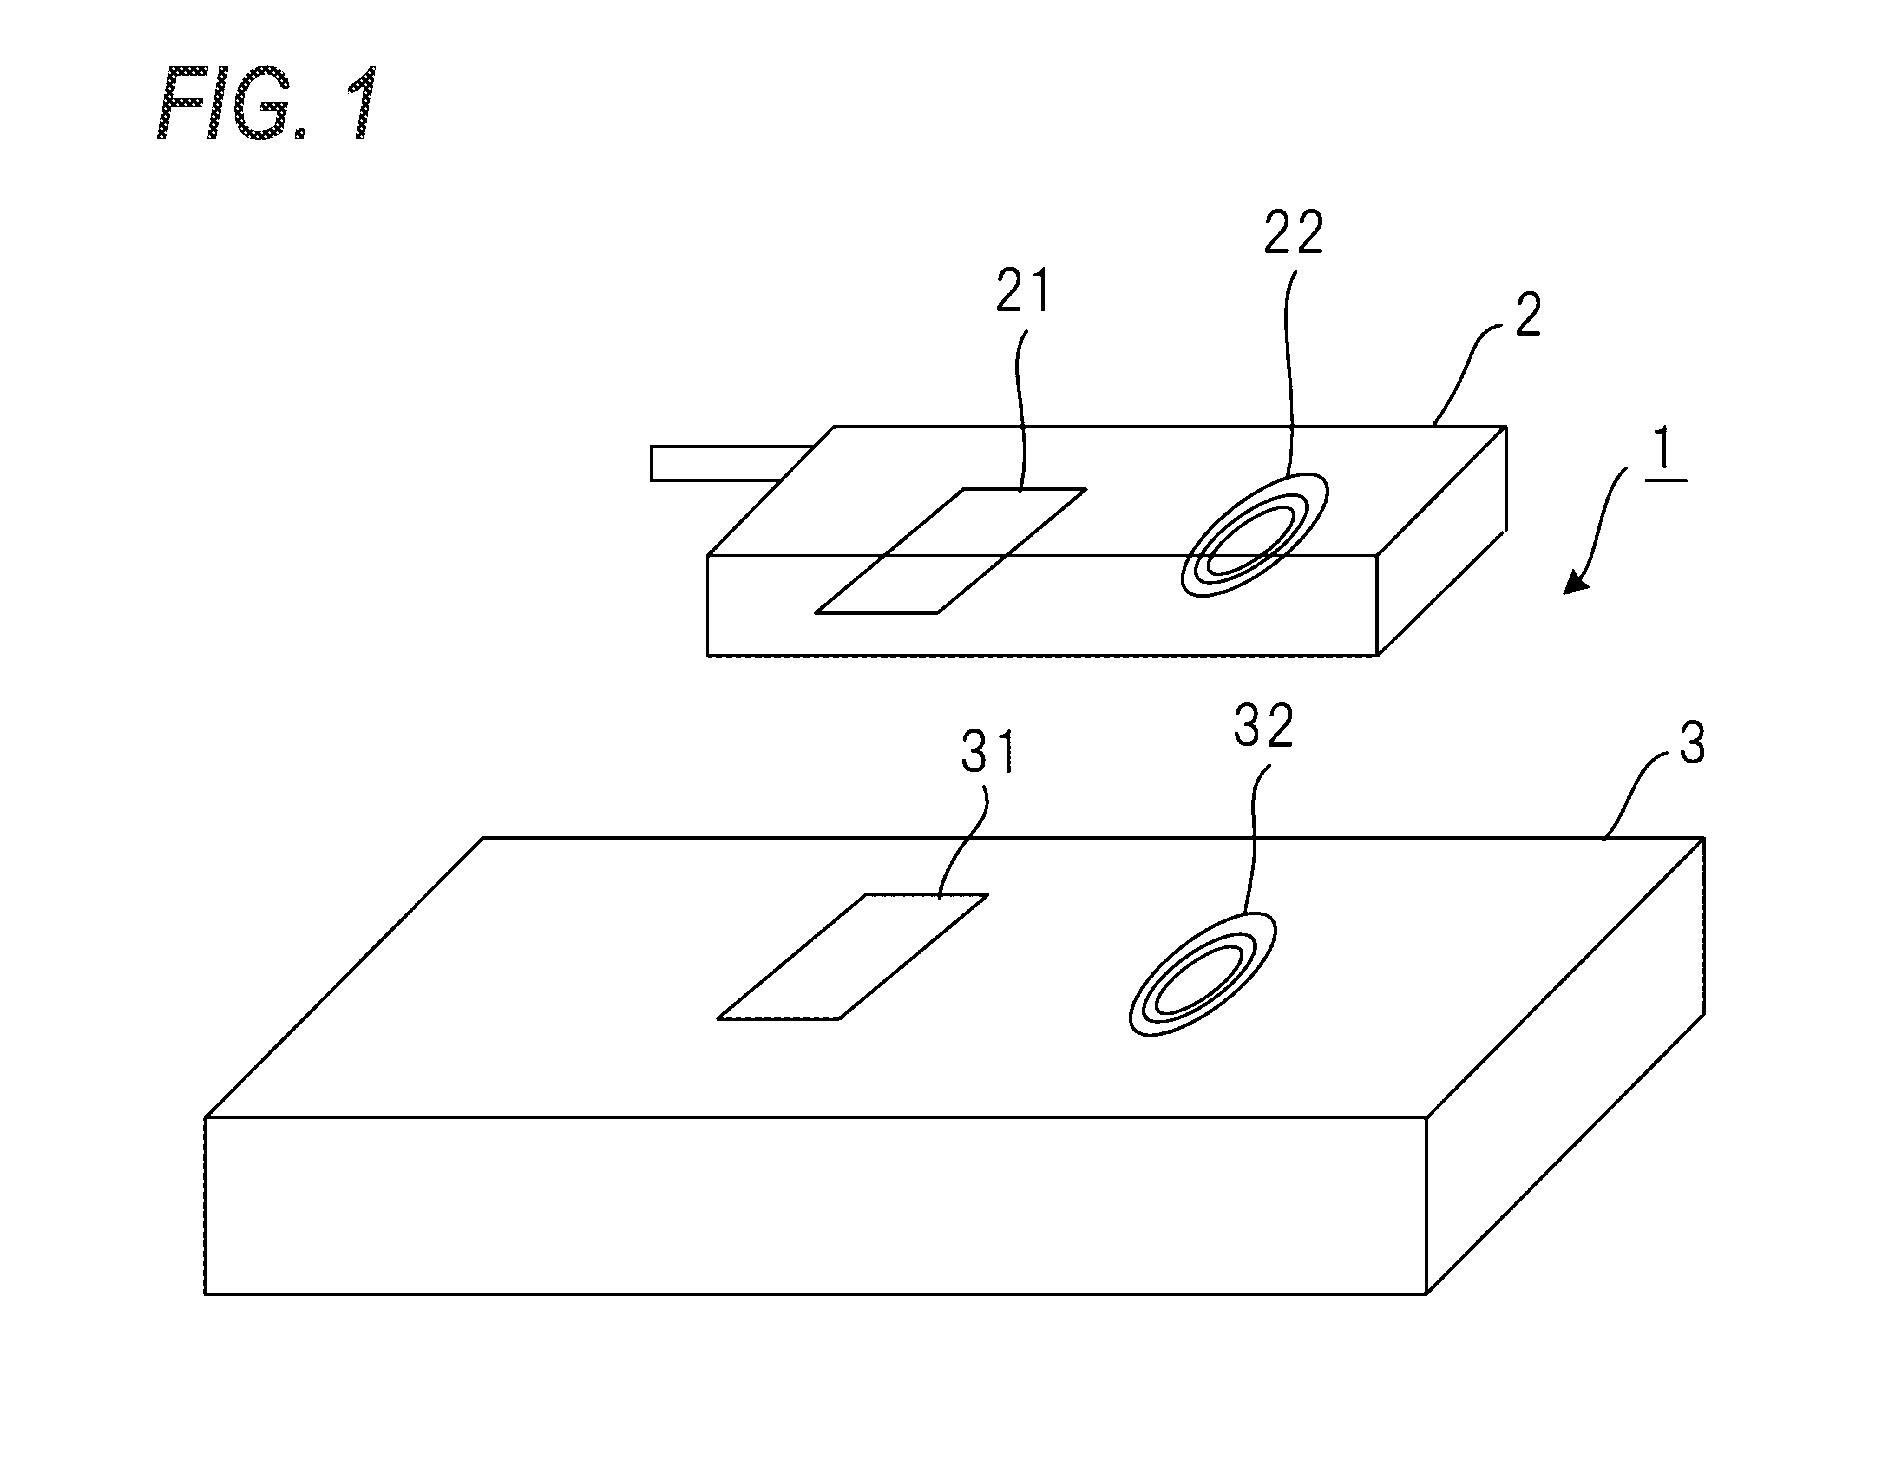 Electronic device, charger, and electronic device charging system